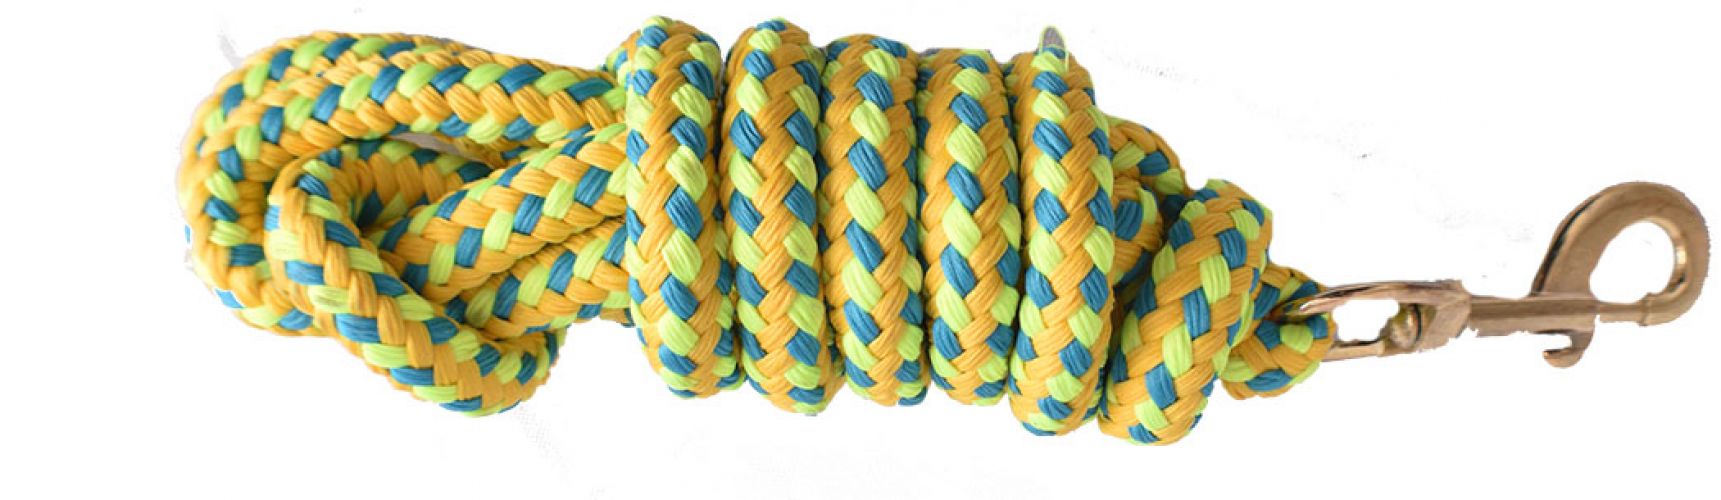 8' Braided Softy Cotton Lead Rope #2